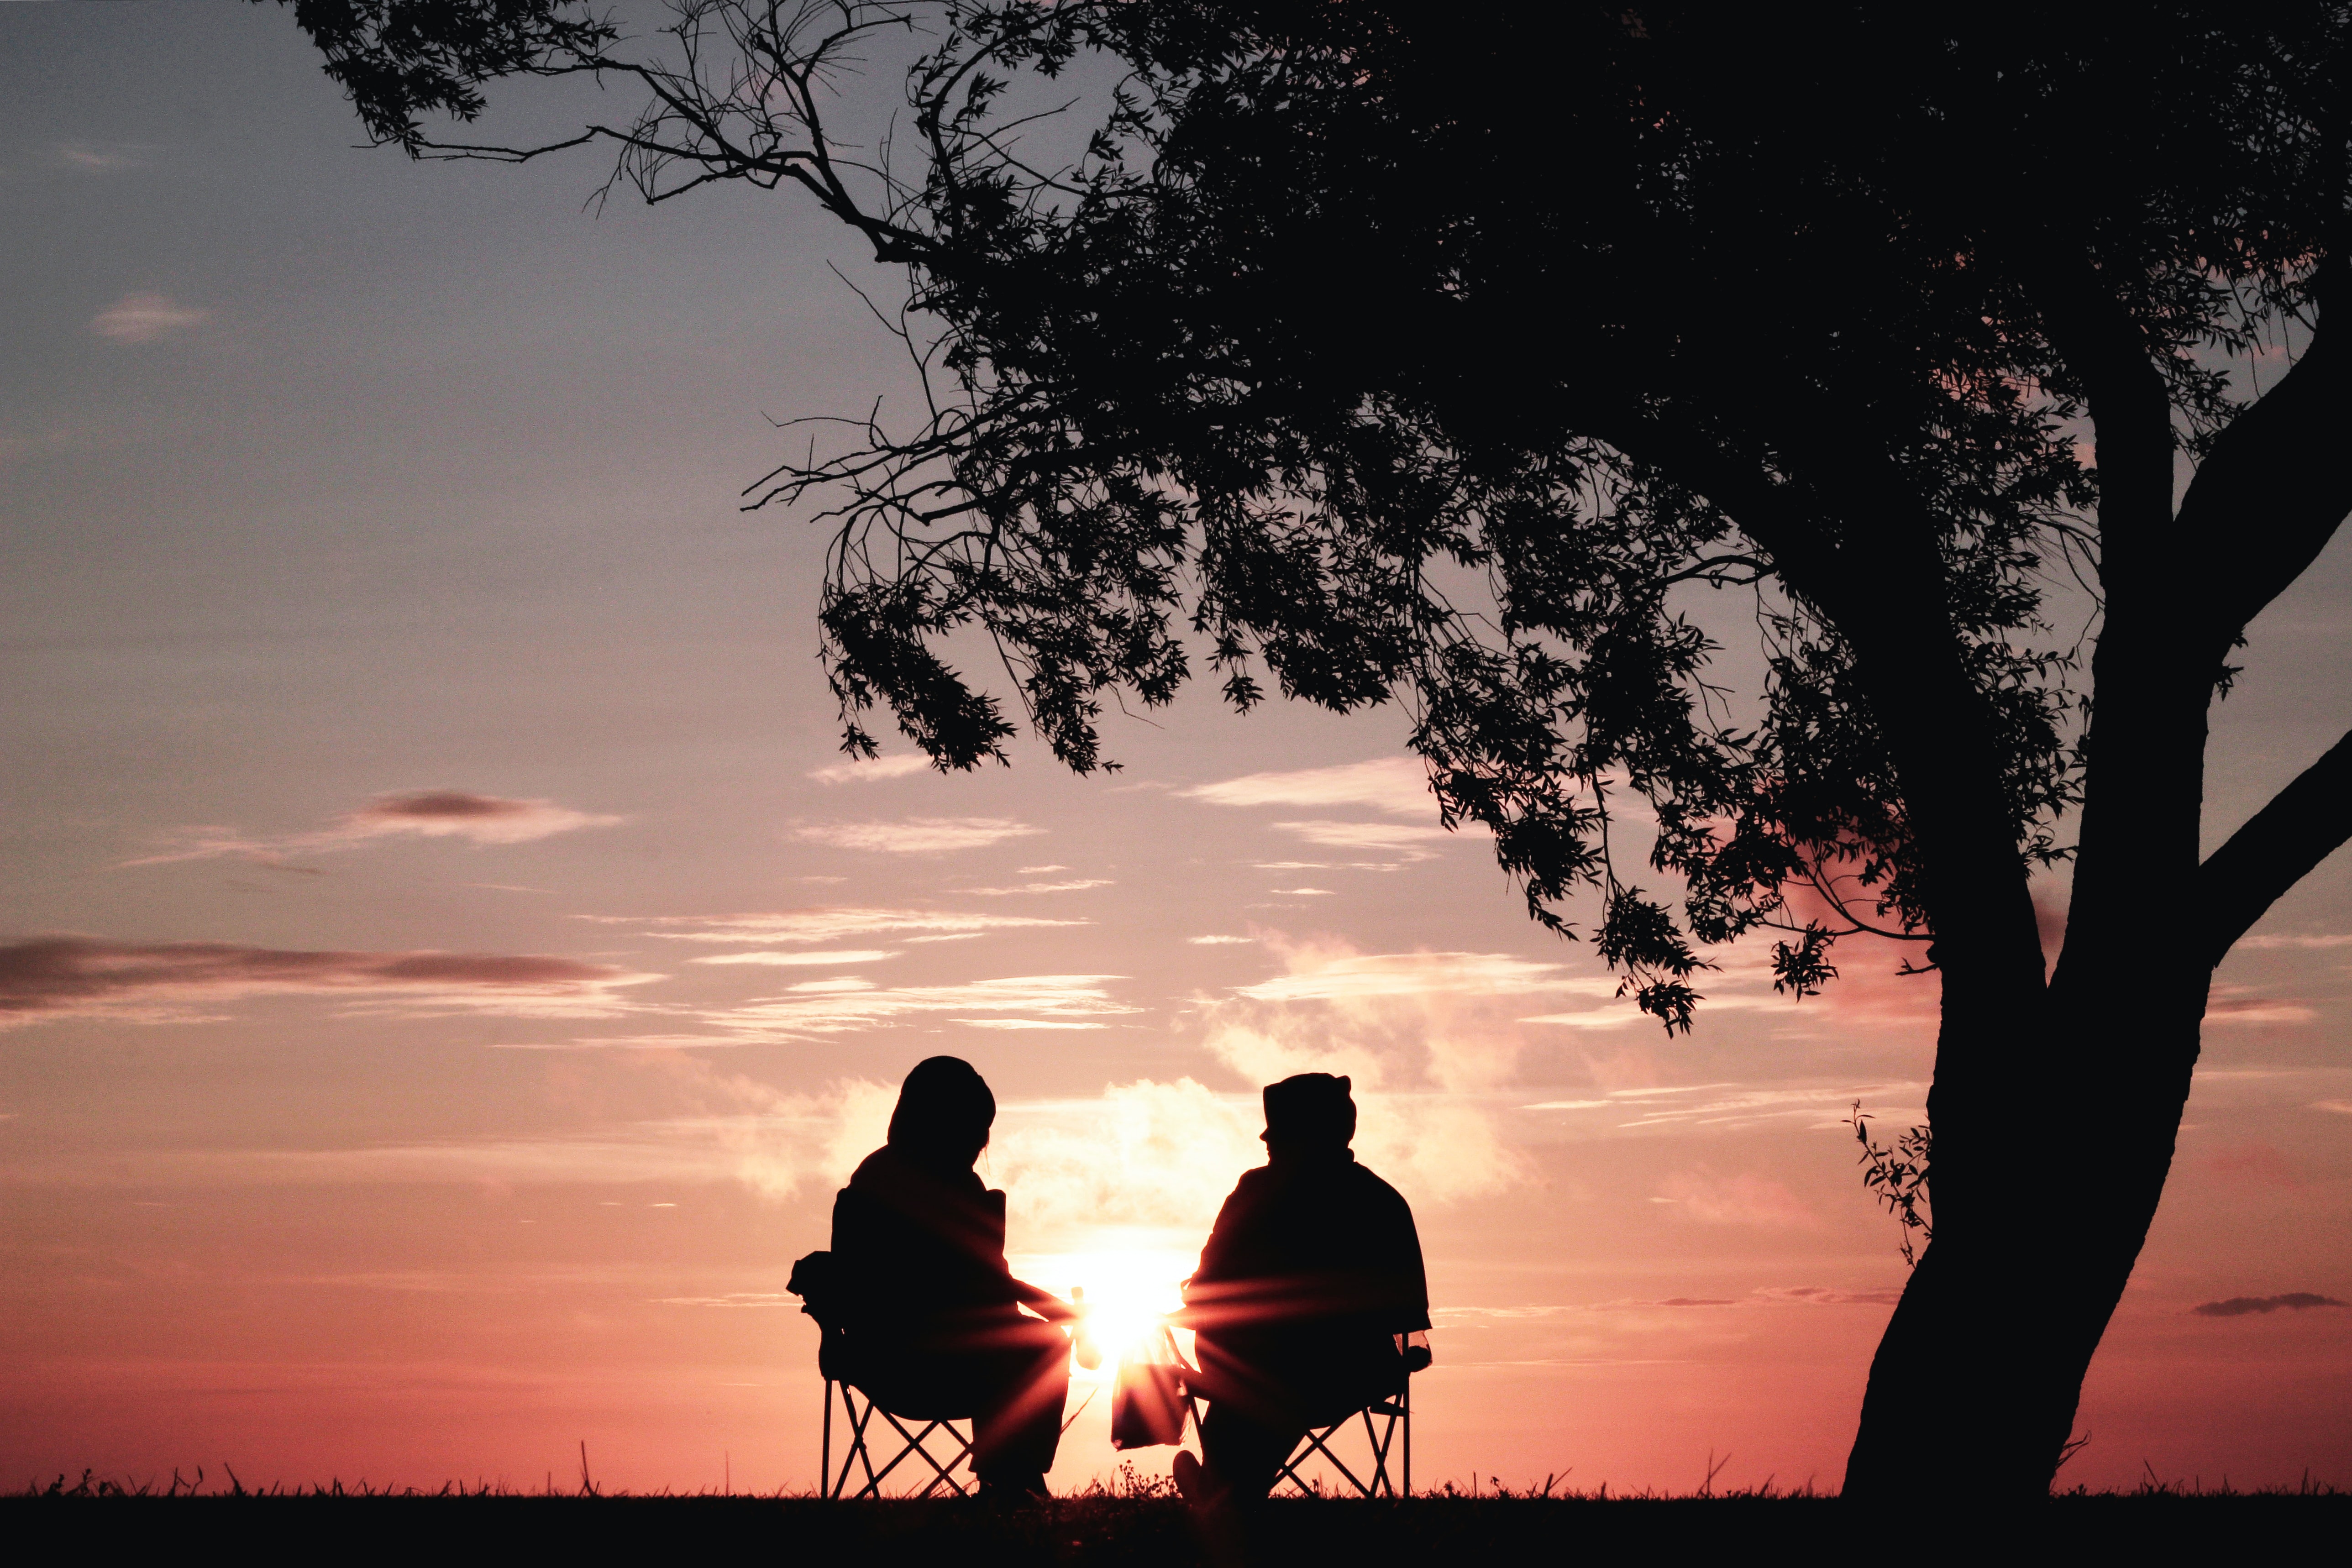 A silouette of two people in the distance sitting on chairs under a tree at sunset having a conversation